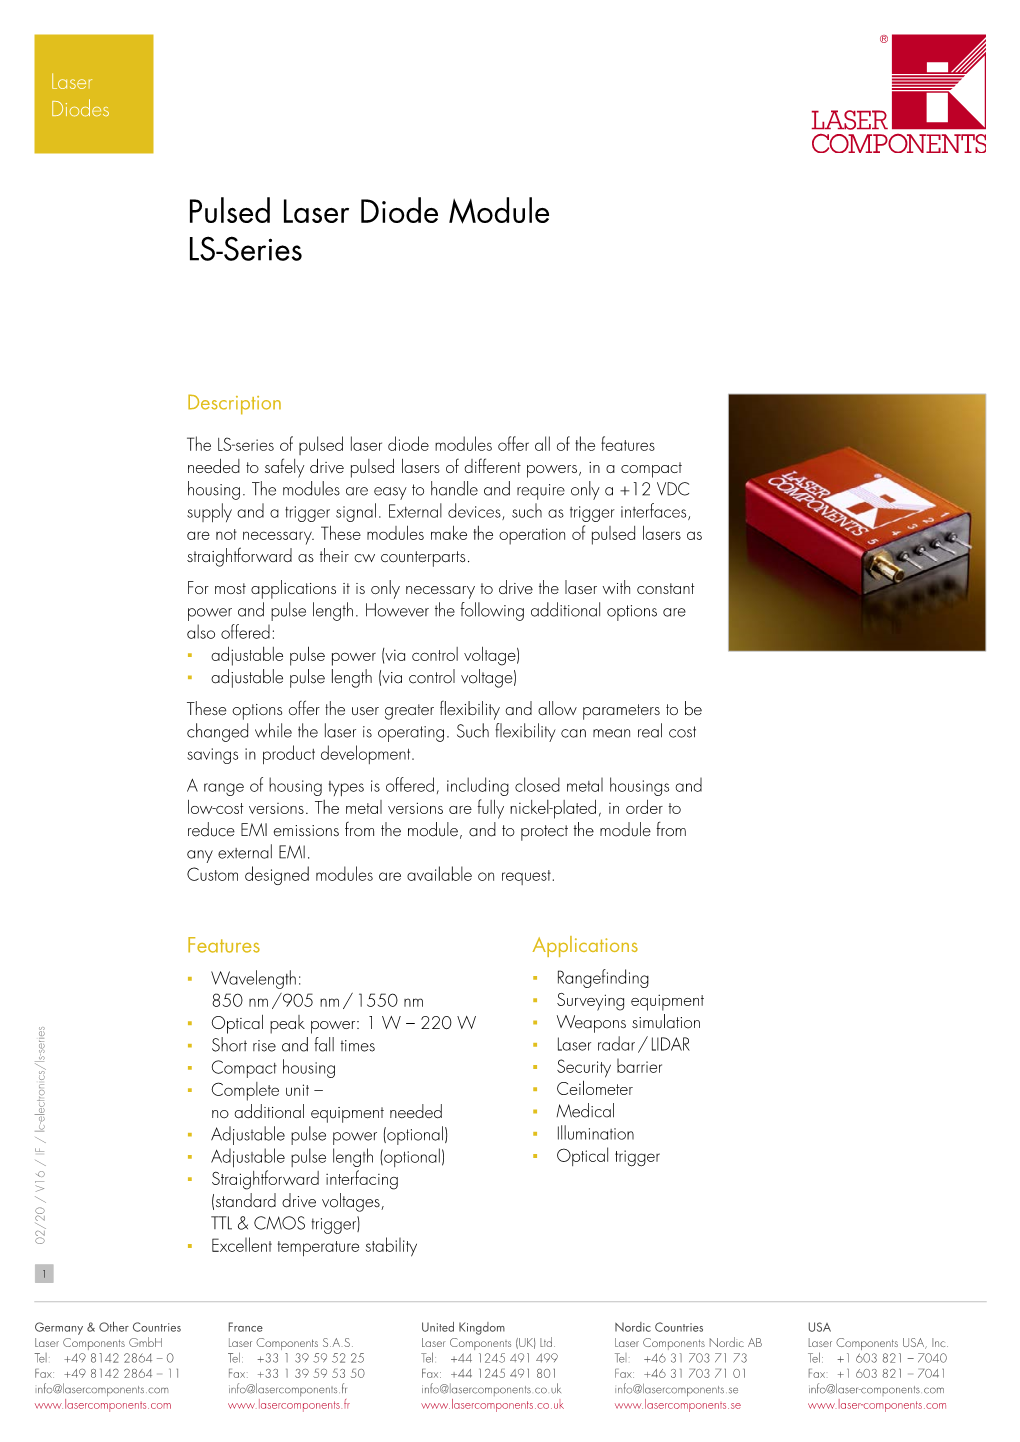 Pulsed Laser Diode Module, LS-Series